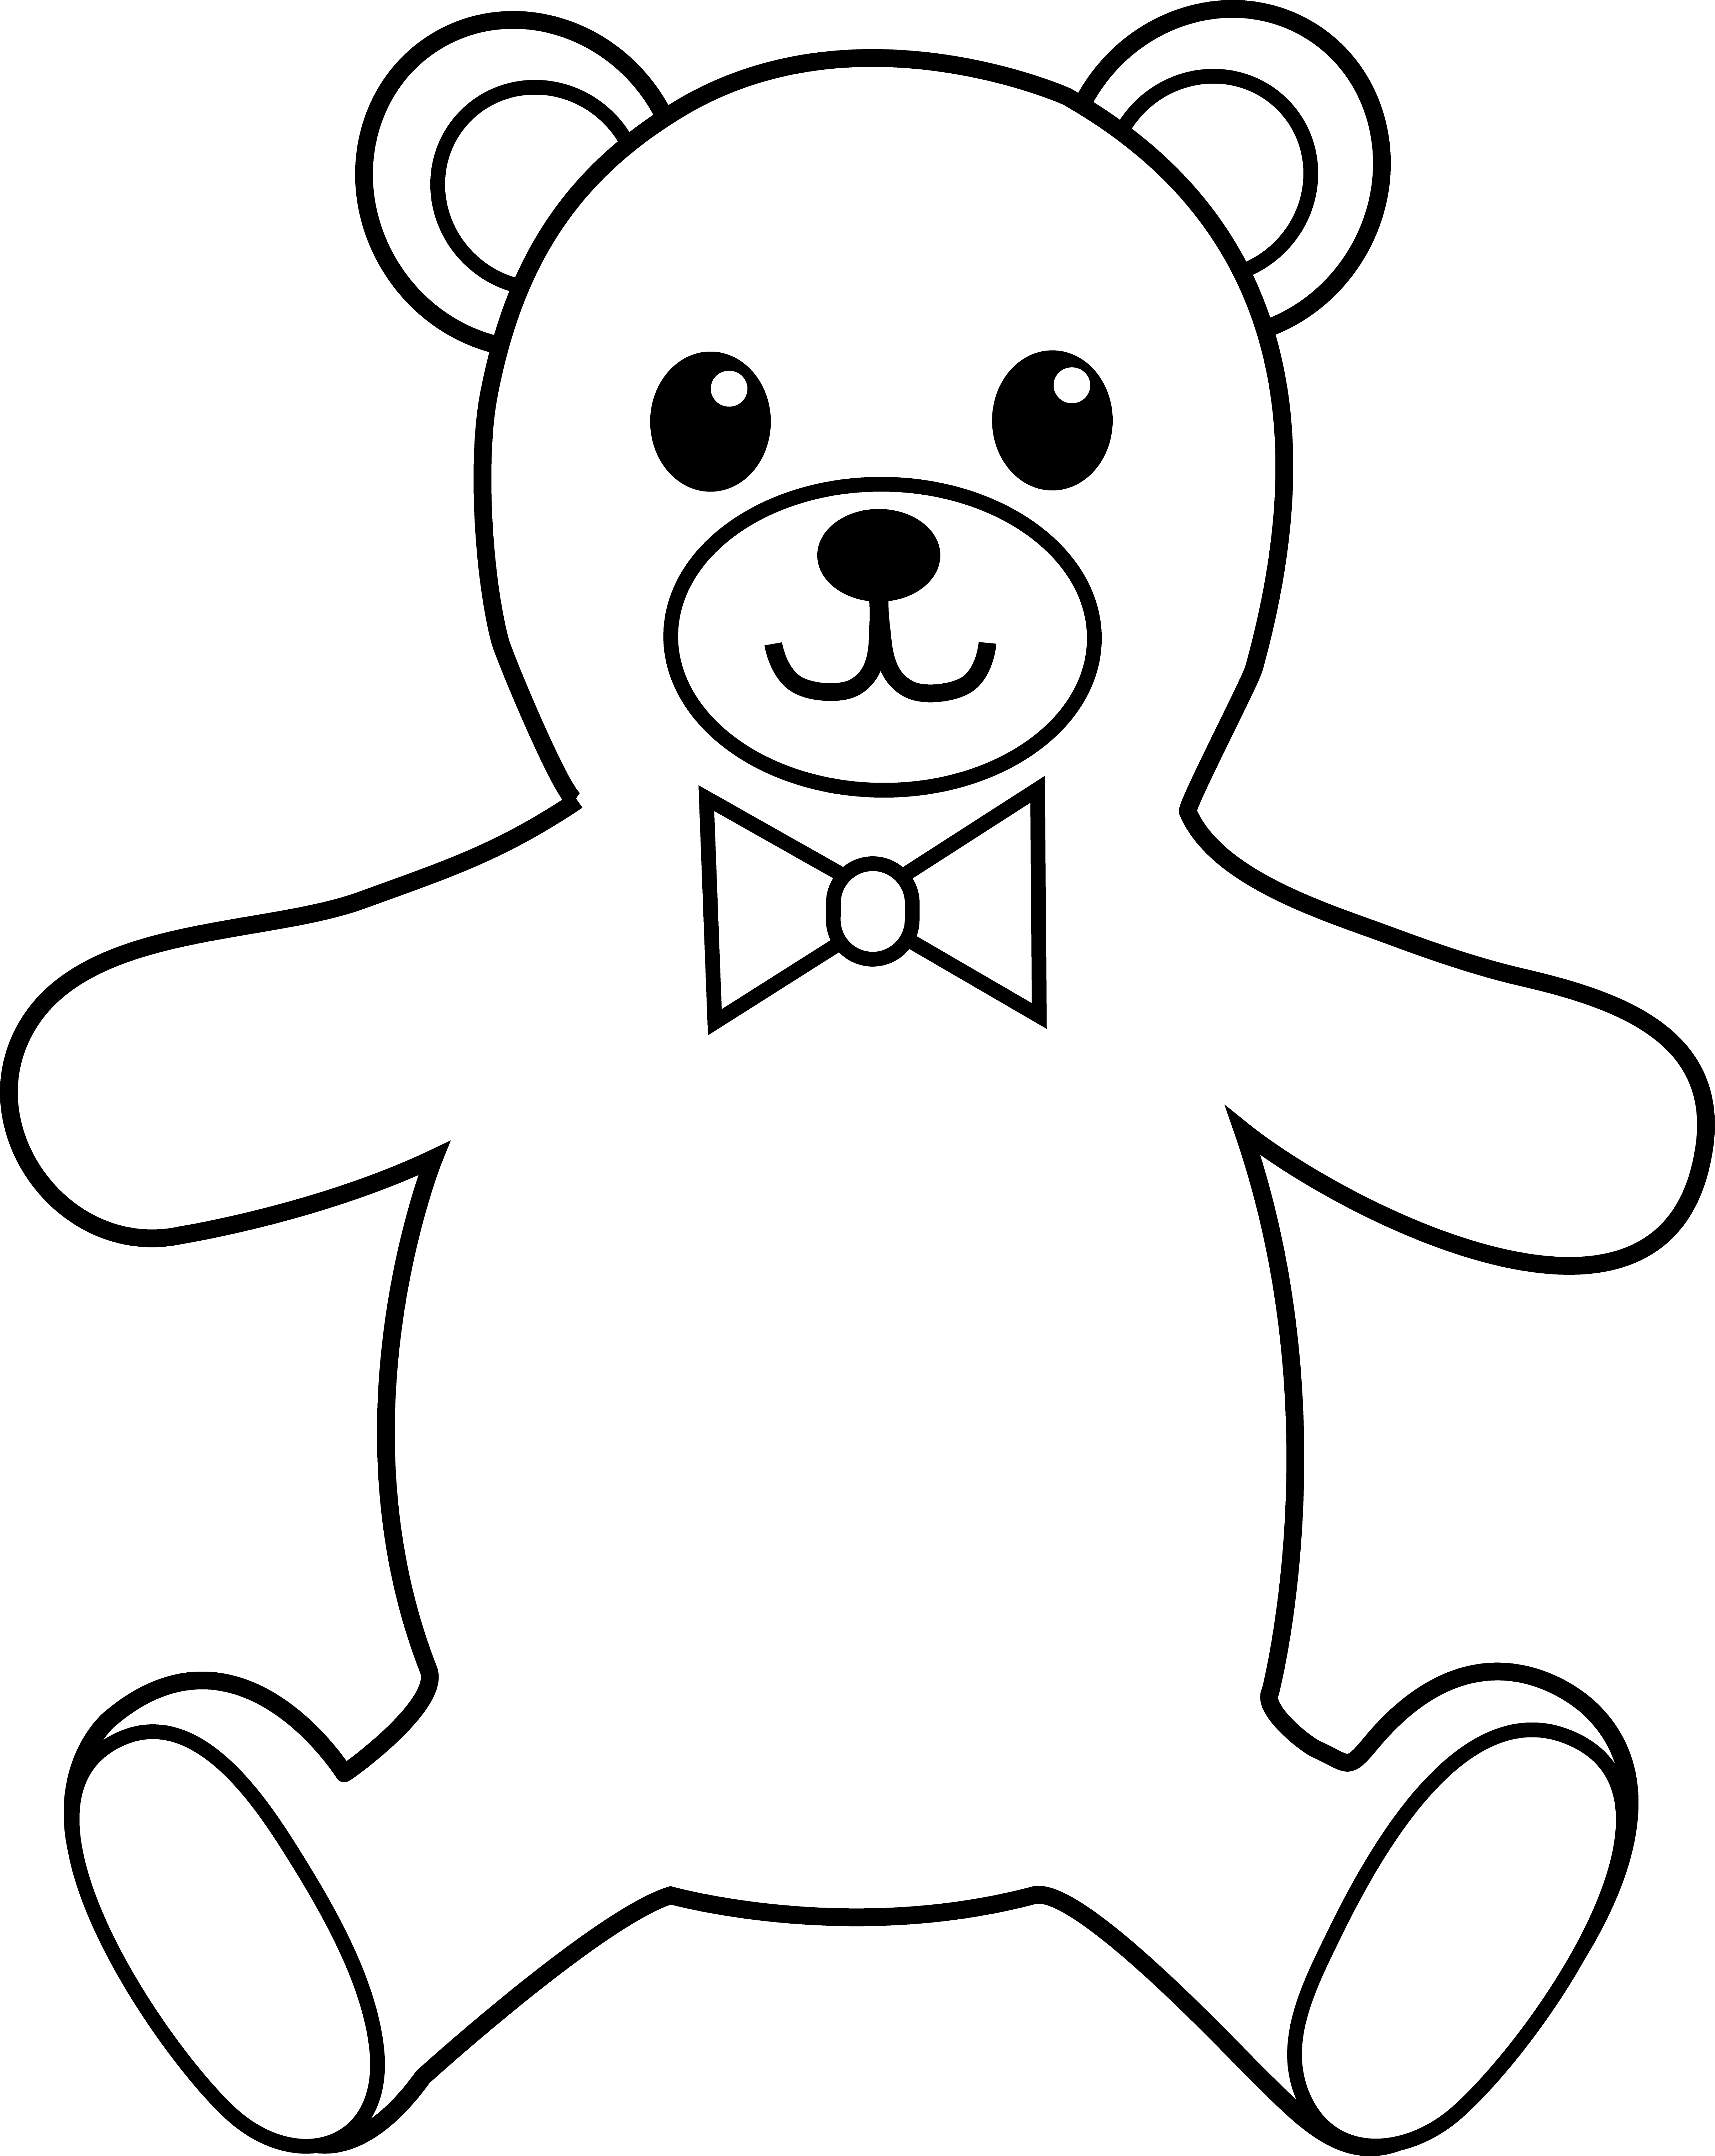 Images For  Black And White Teddy Bear Clip Art